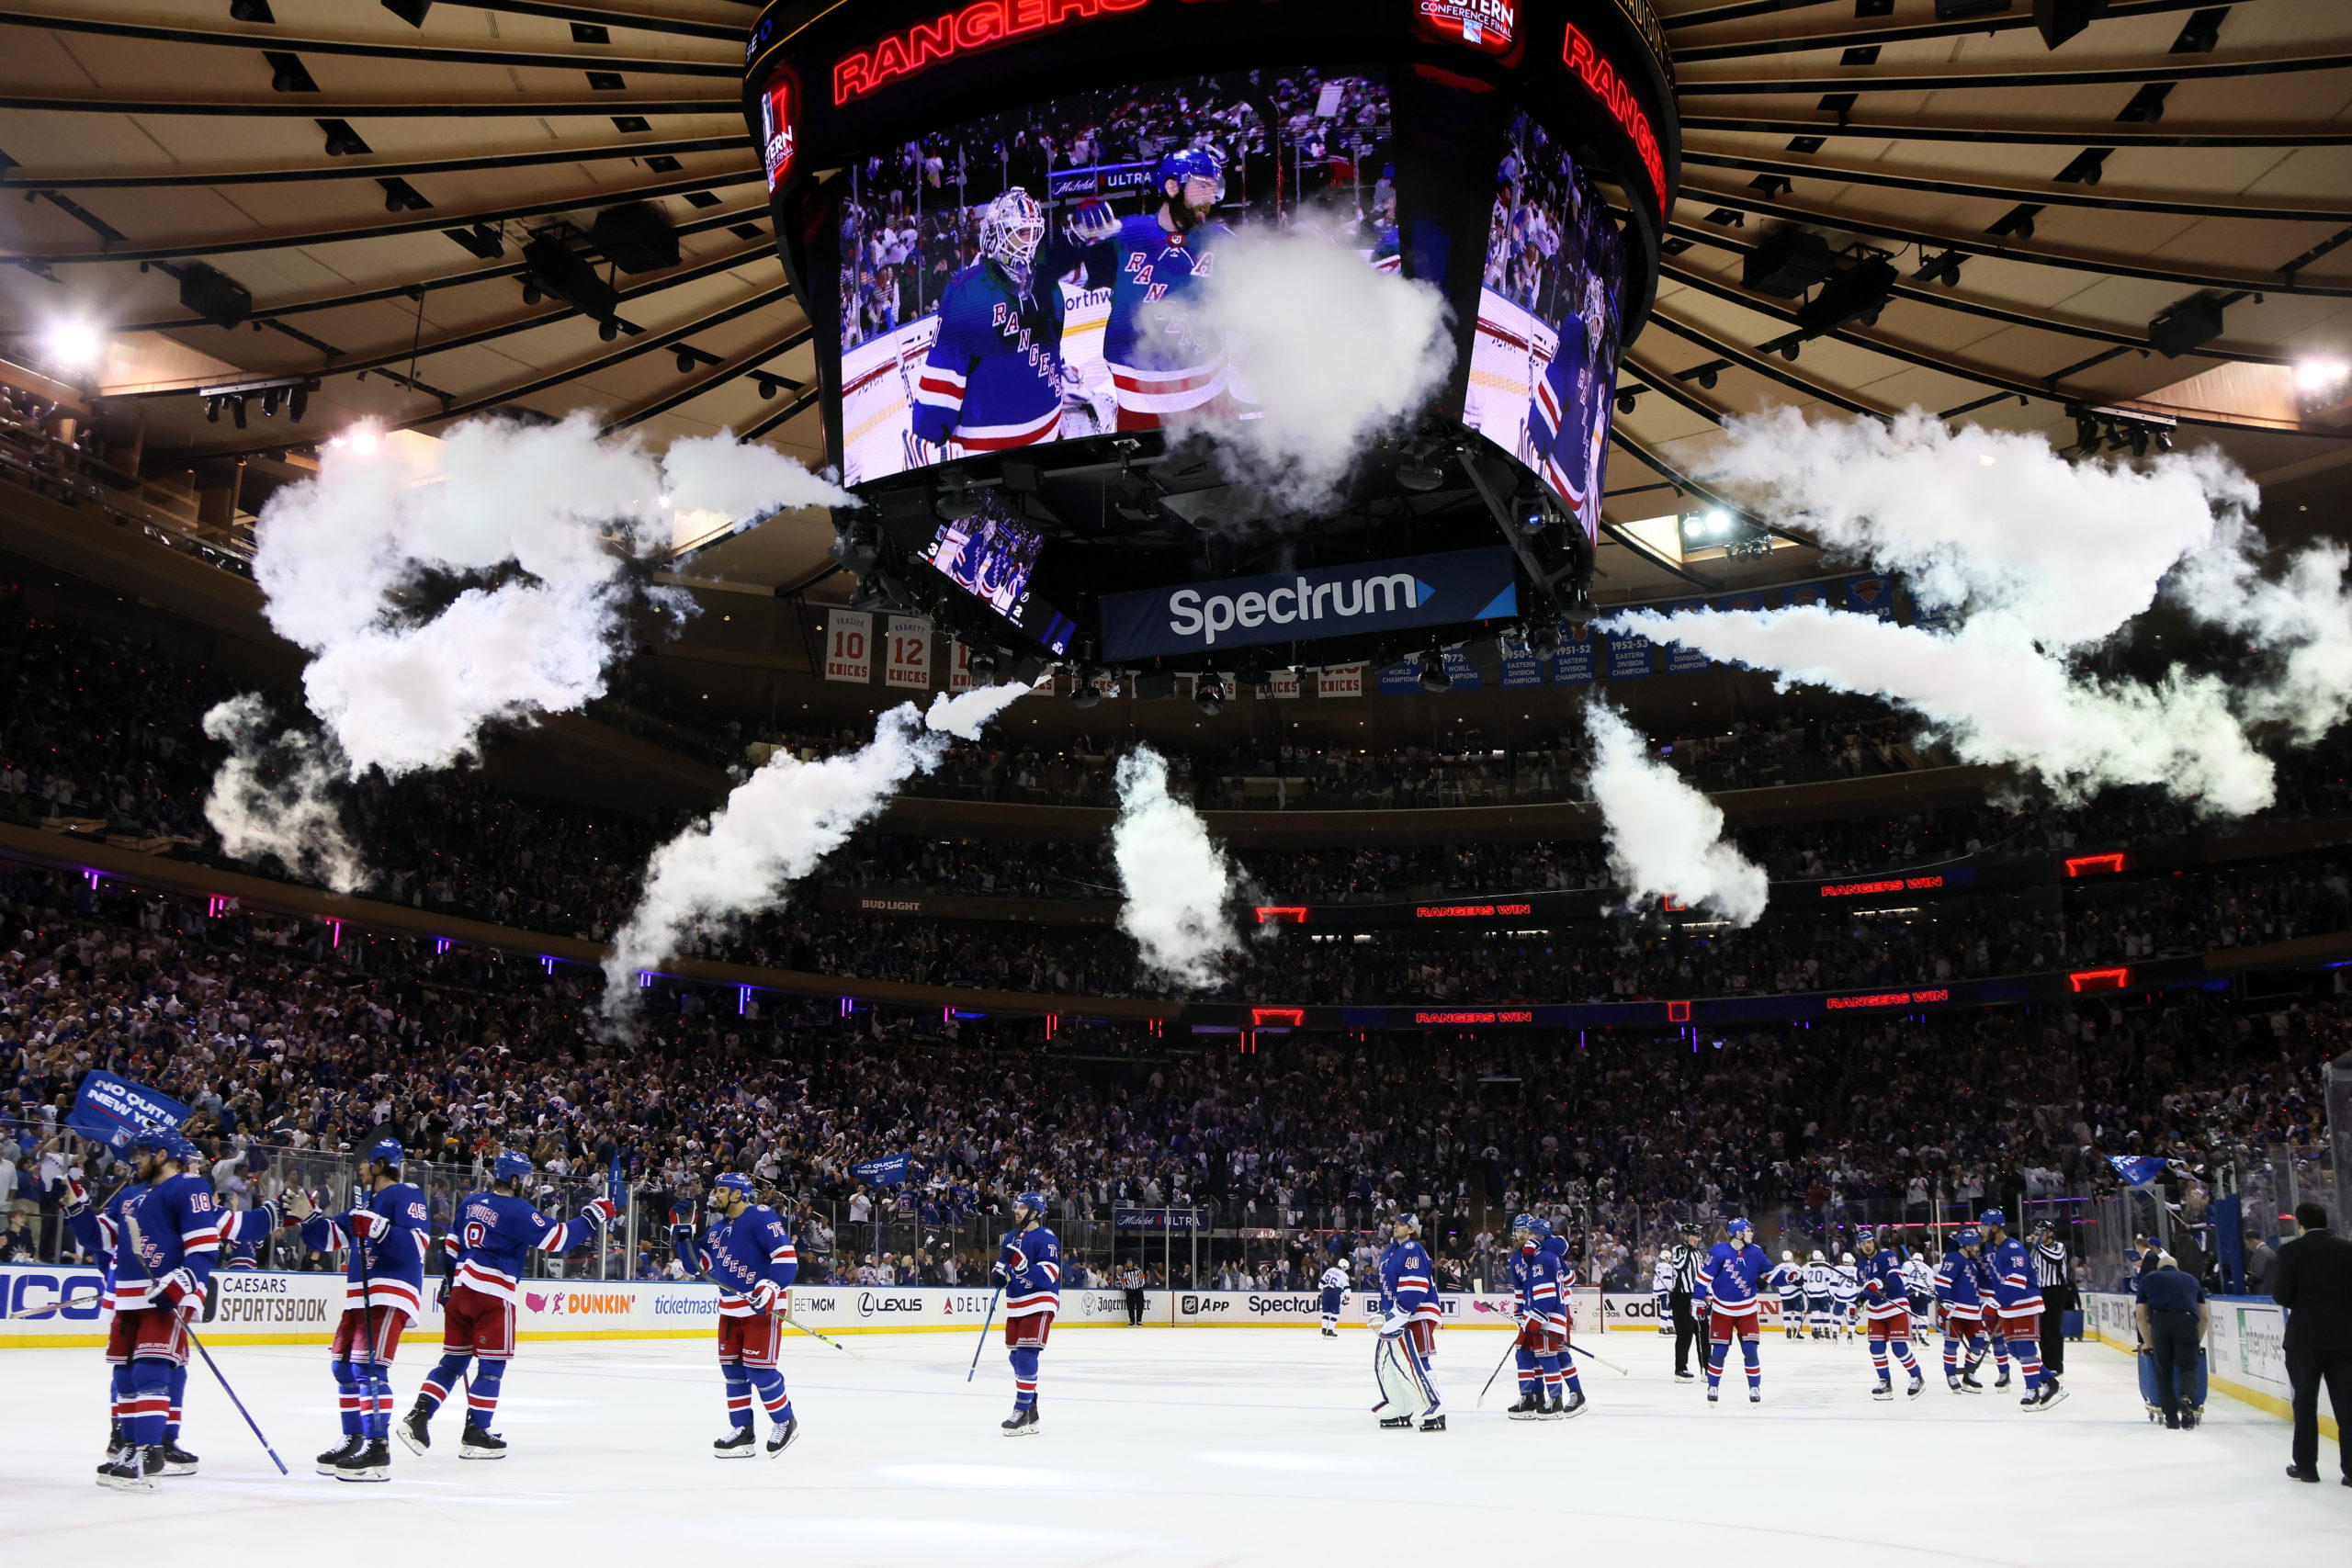 How to Watch New York Rangers vs. Buffalo Sabres: Live Stream, TV